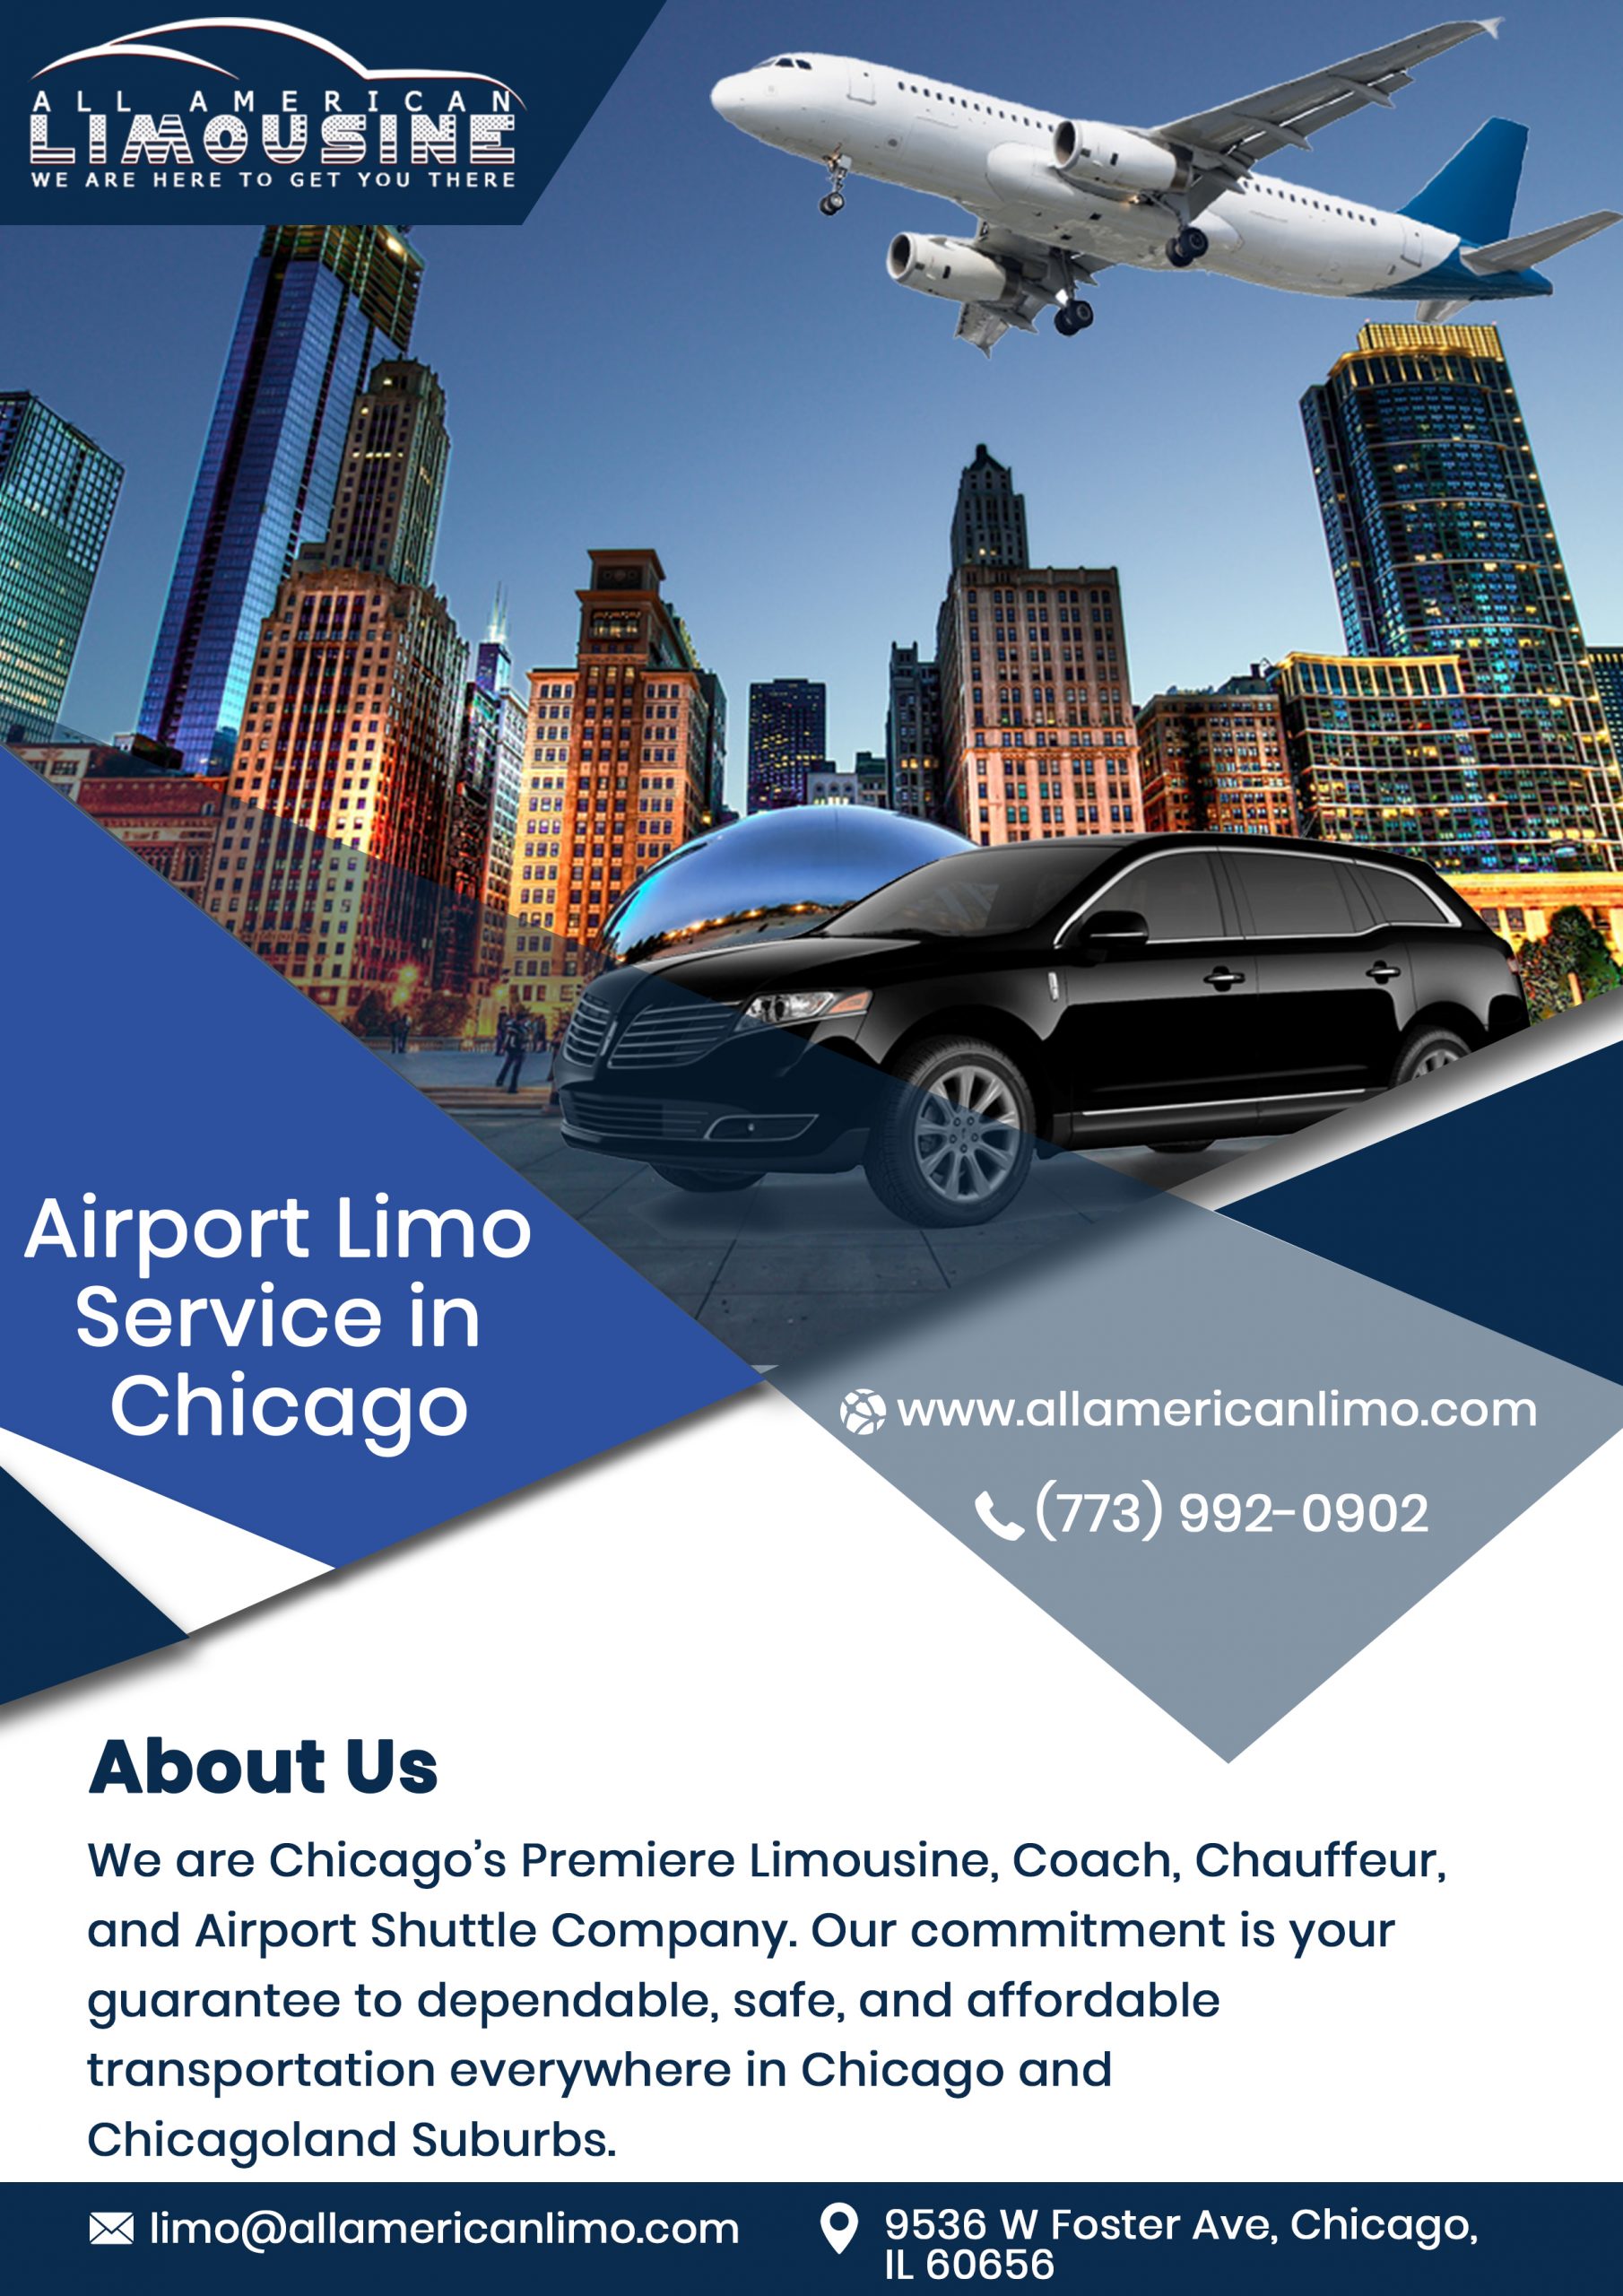 Chicago Car Service Near Me 60640, Party Bus 60640, Mercedes Sprinter Limo to 60640, Chicago Limo 60640, Limo Service 60640 to Airport, Hire, Rent, Get, Find, Car Service 60640 to Airport, Transportation Service 60640 to O'Hare, Corporate Travel 60640, Airport Travel 60640